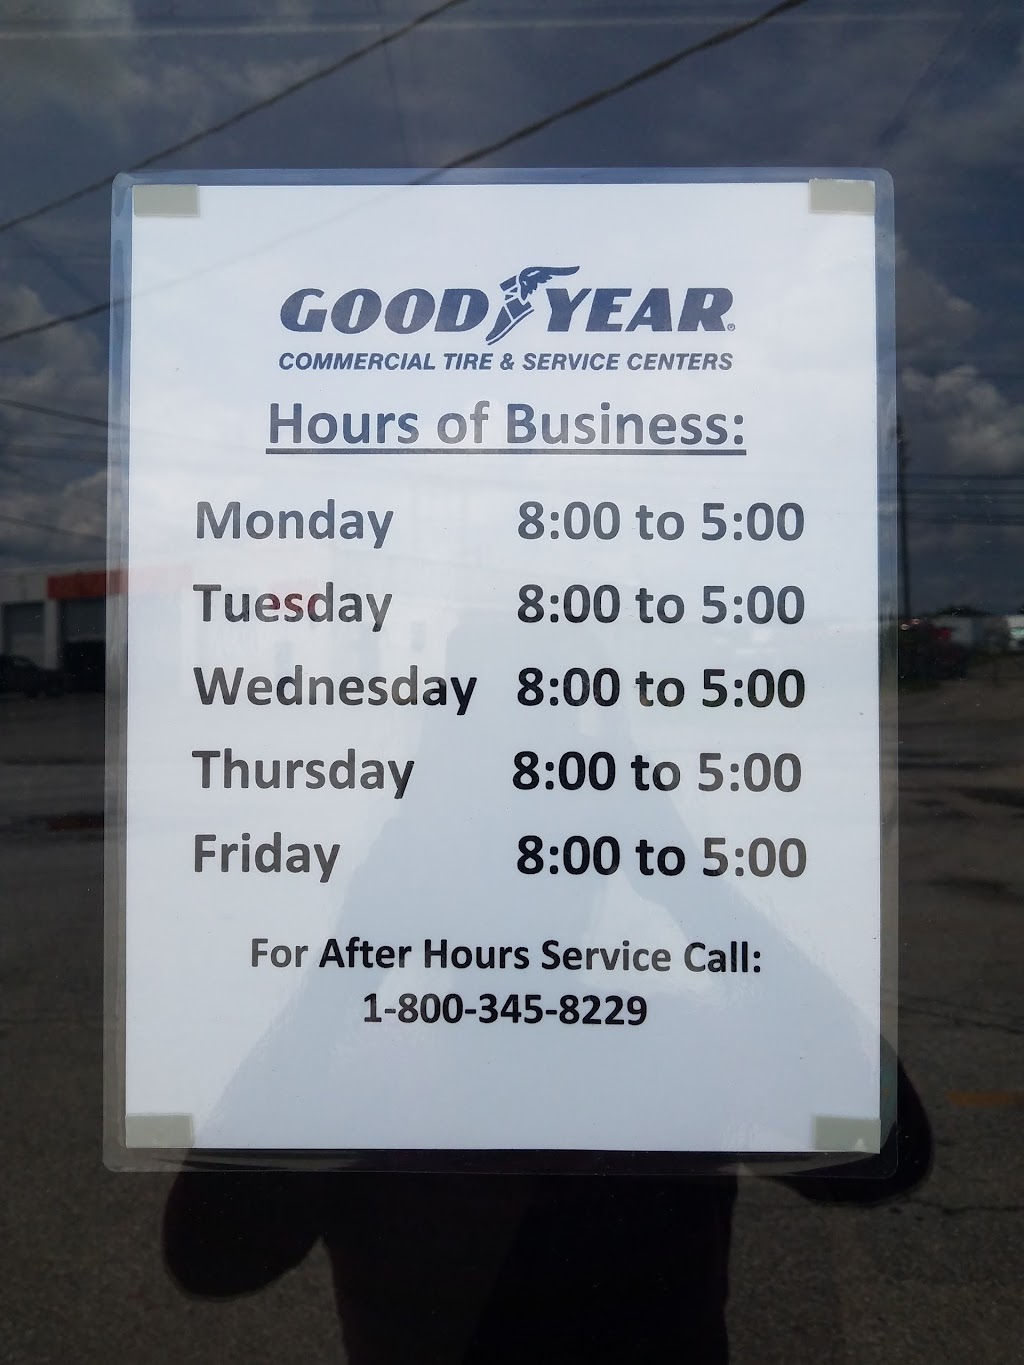 Goodyear Commercial Tire & Service Centers | 210 Keystone Rd, Chester, PA 19013 | Phone: (610) 494-2160